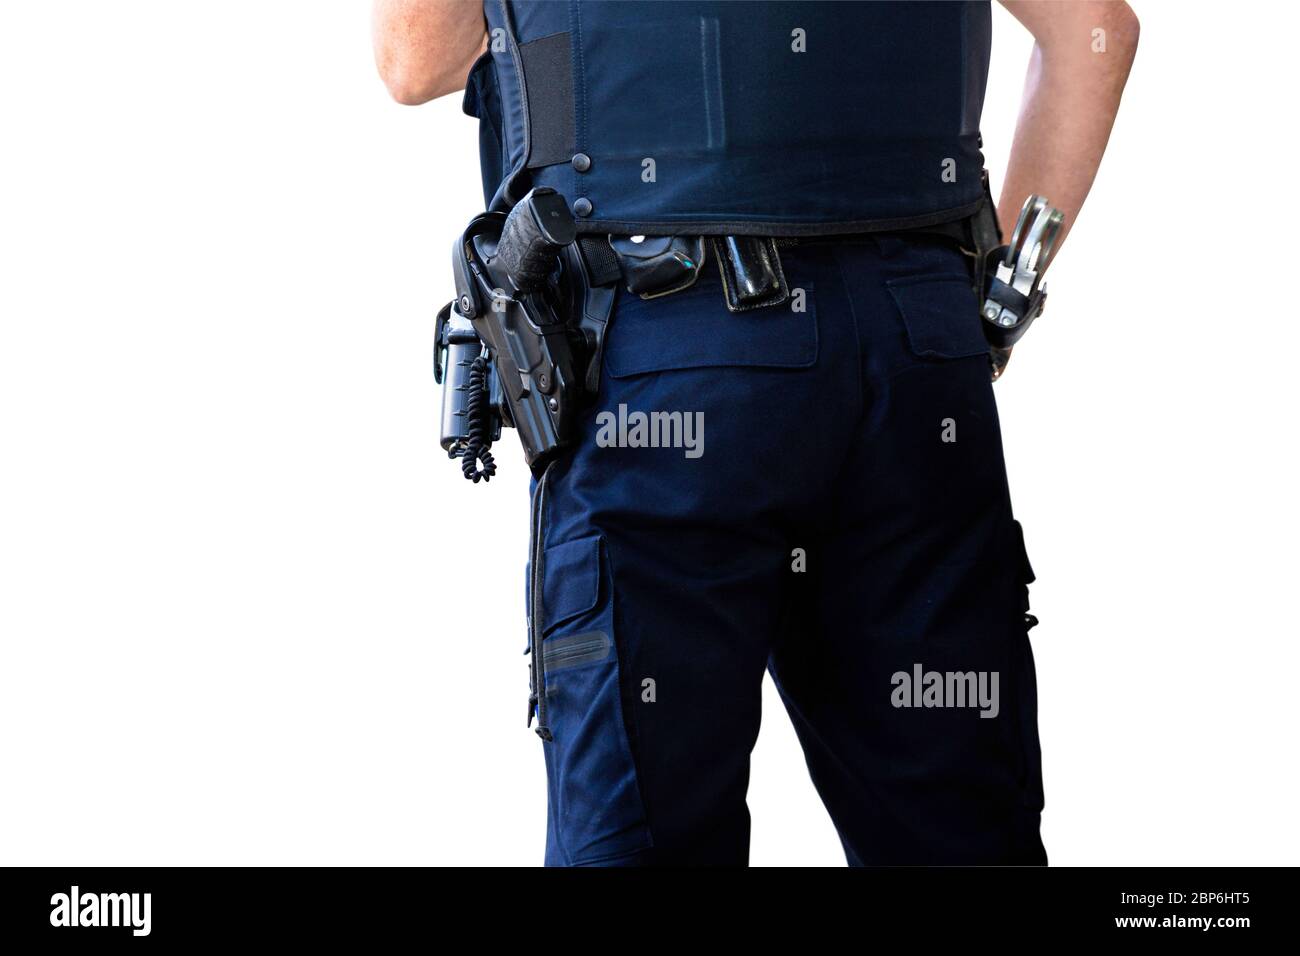 Police officer, with gun belt, handcuffs phone and pepper-spray. Isolated on white background Stock Photo